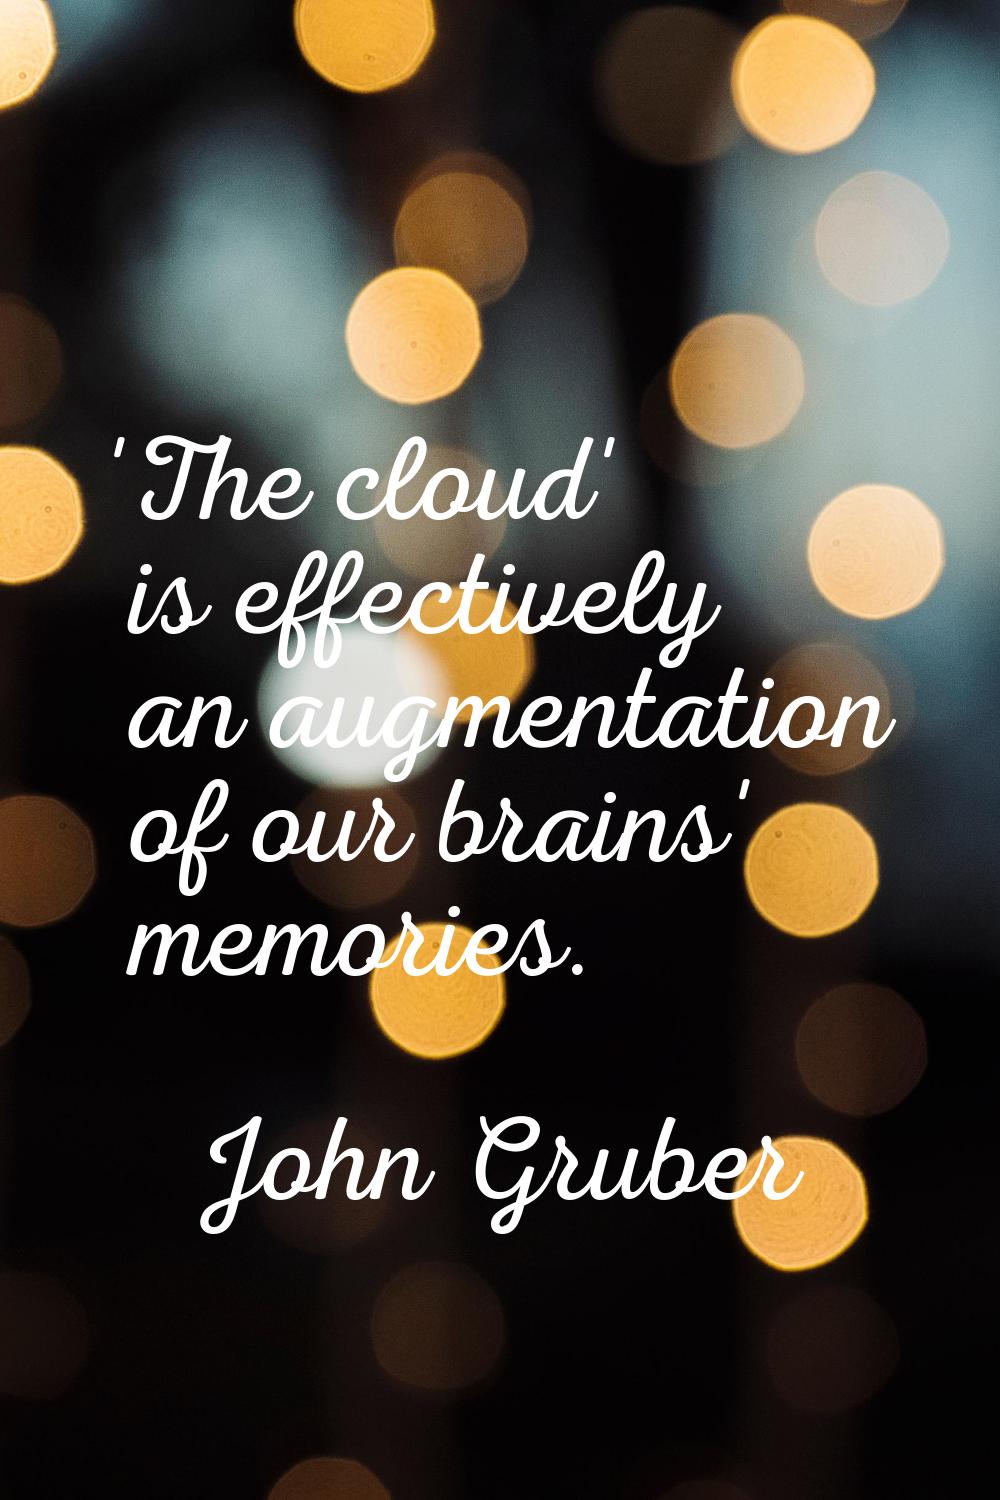 'The cloud' is effectively an augmentation of our brains' memories.